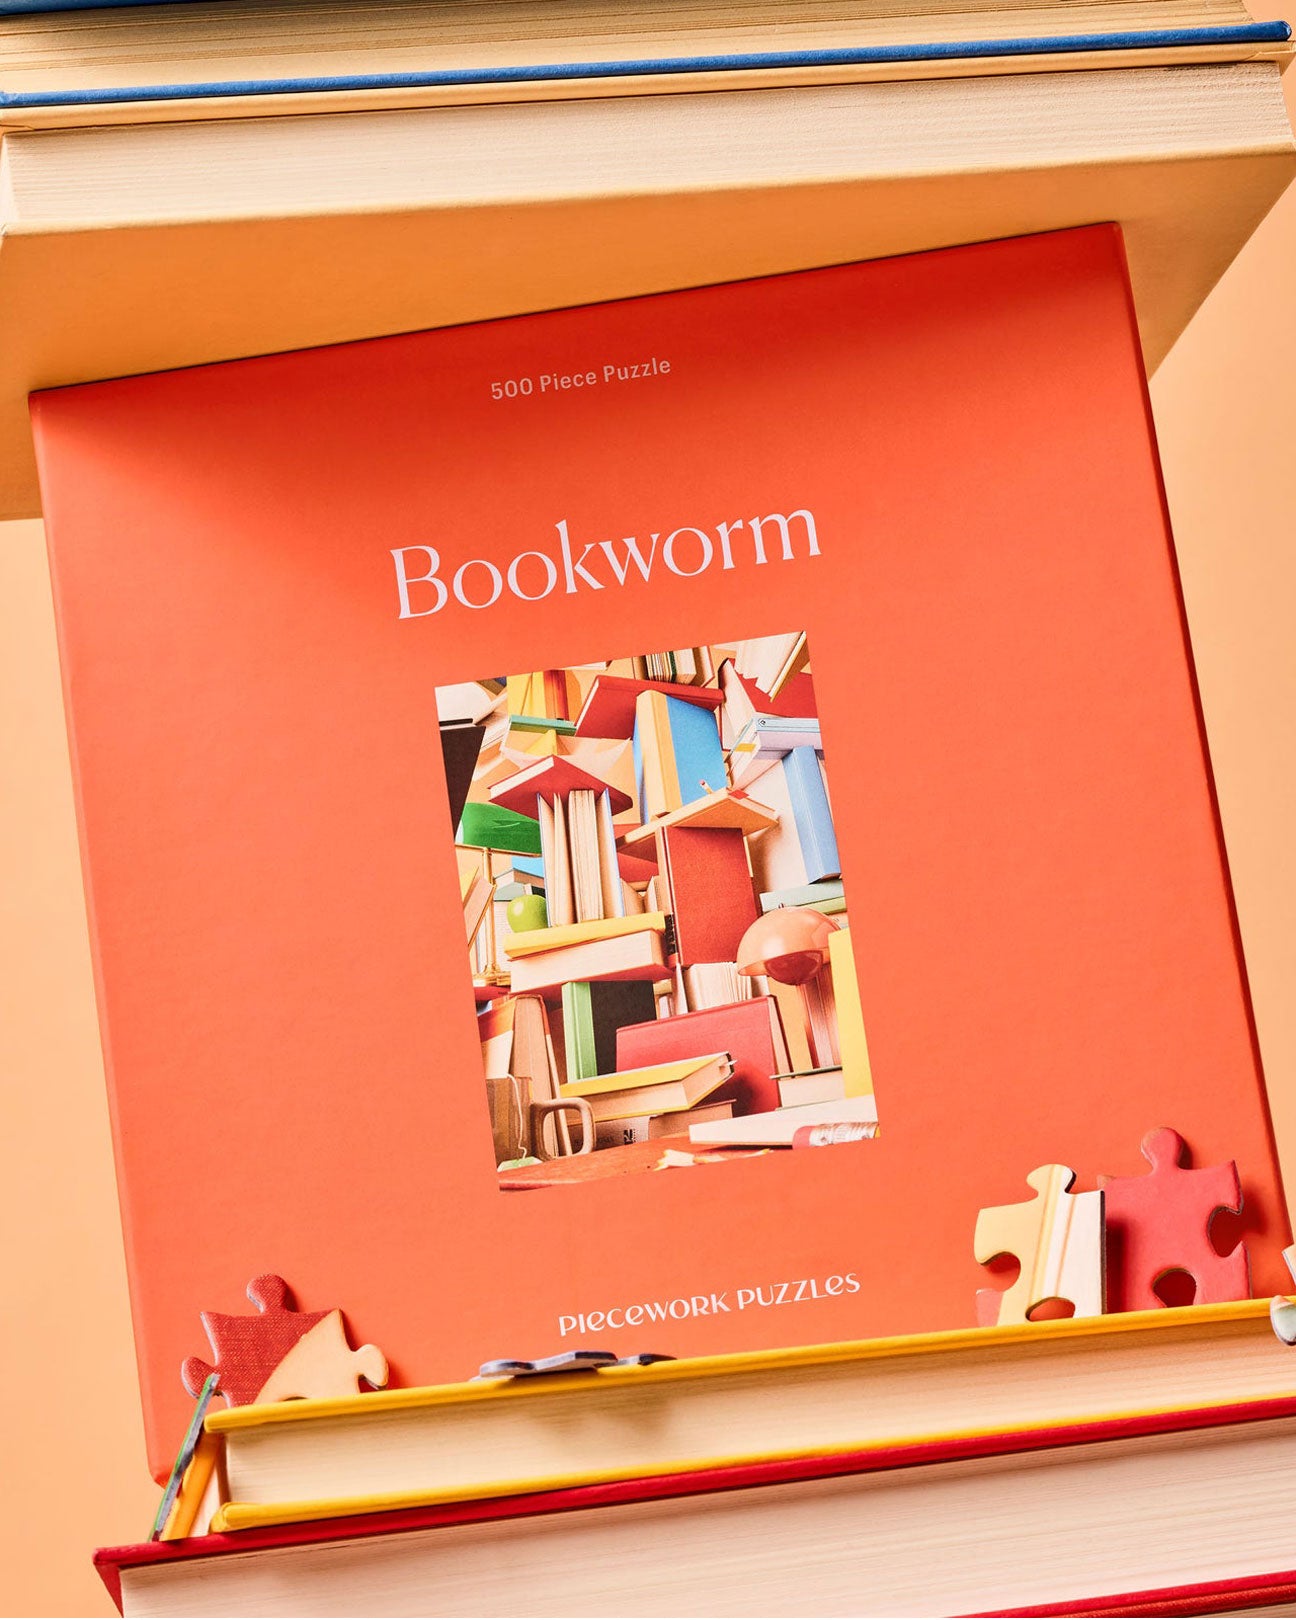 PIECEWORK 500 Piece Puzzle in Bookworm available at Lahn.shop